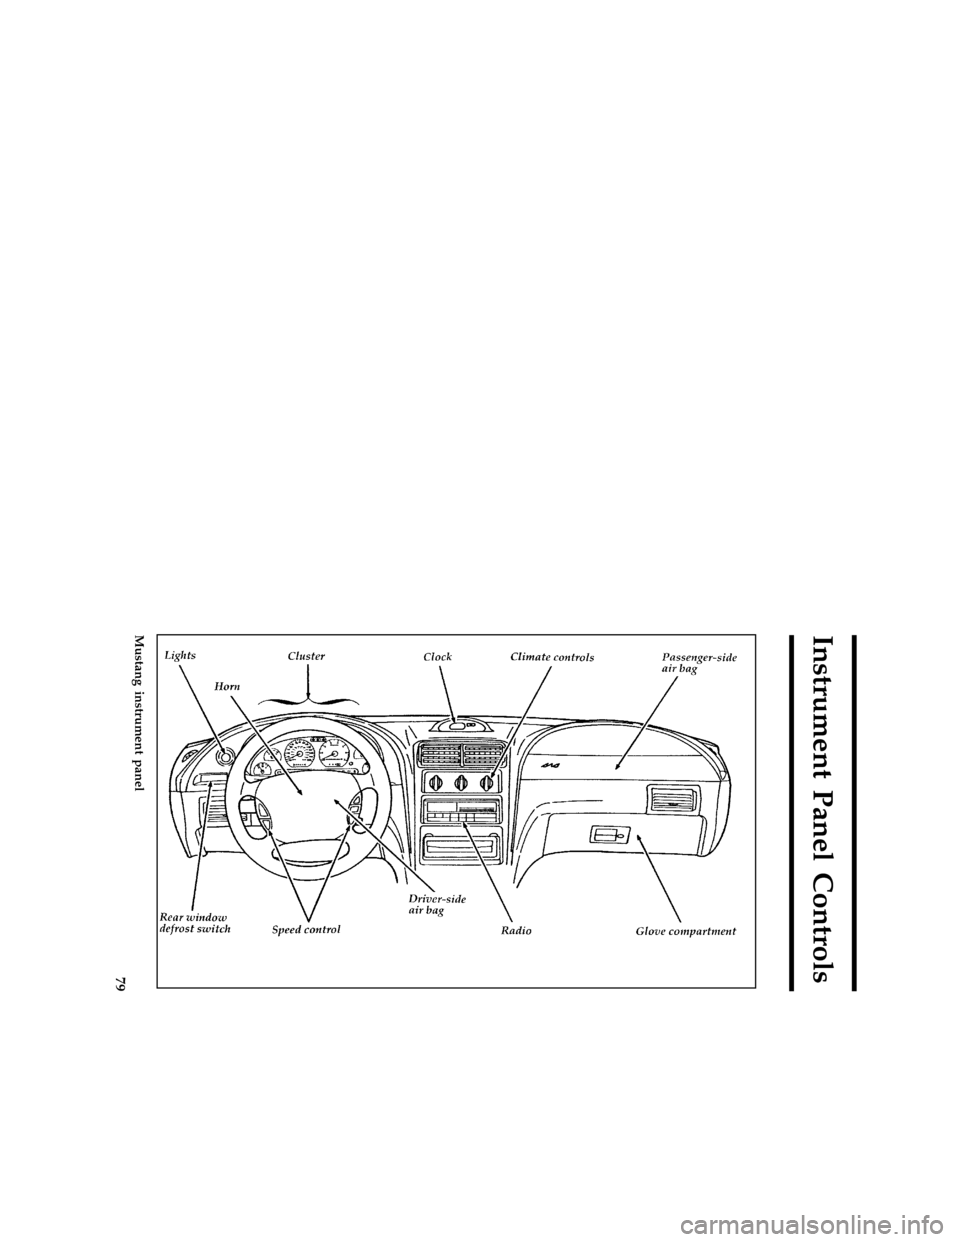 FORD MUSTANG 1996 4.G Manual PDF 79
Instrument Panel Controls
[IP00260(M )05/95]
full page art:0010099-K
Mustang instrument panel
File:06rcipm.ex
Update:Wed Mar 27 09:30:23 1996 